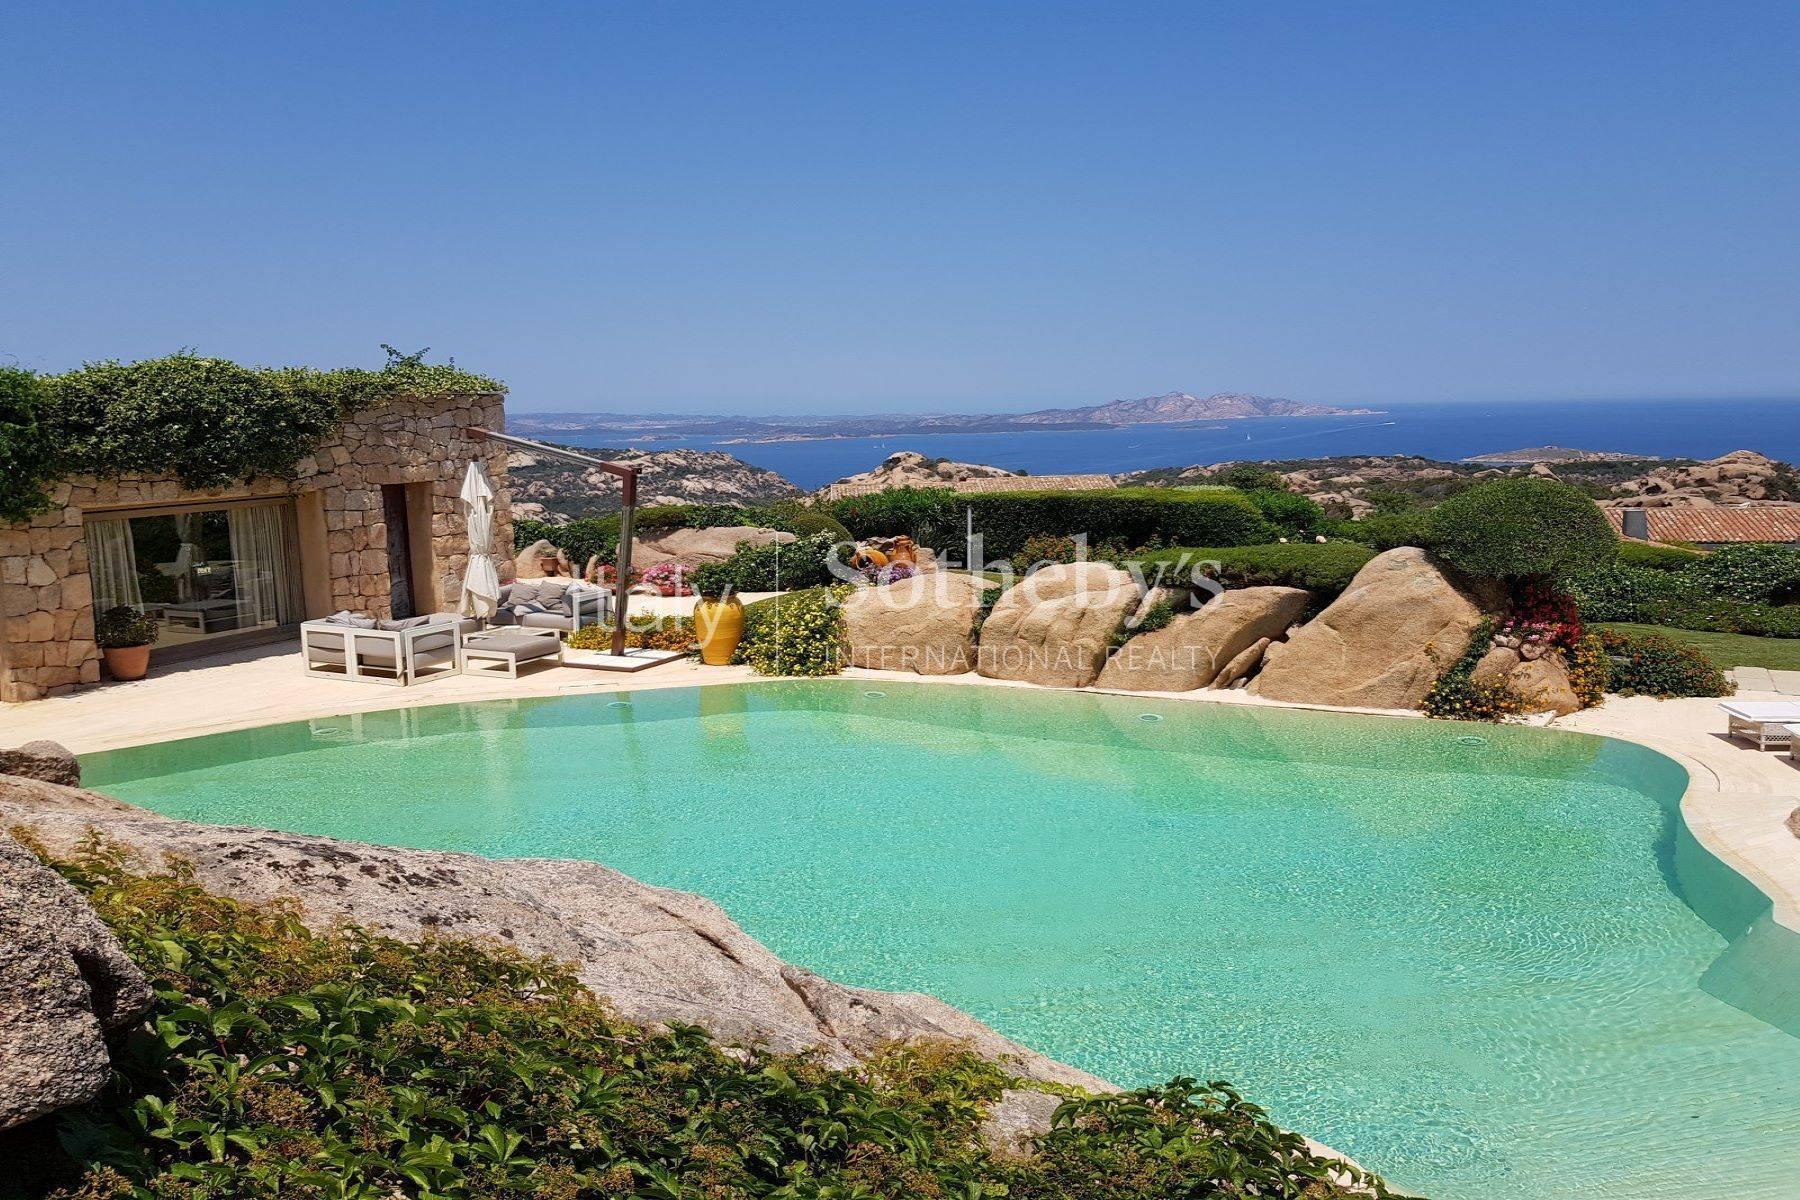 Exclusive property with stunning sea views overlooking the Costa Smeralda - 2